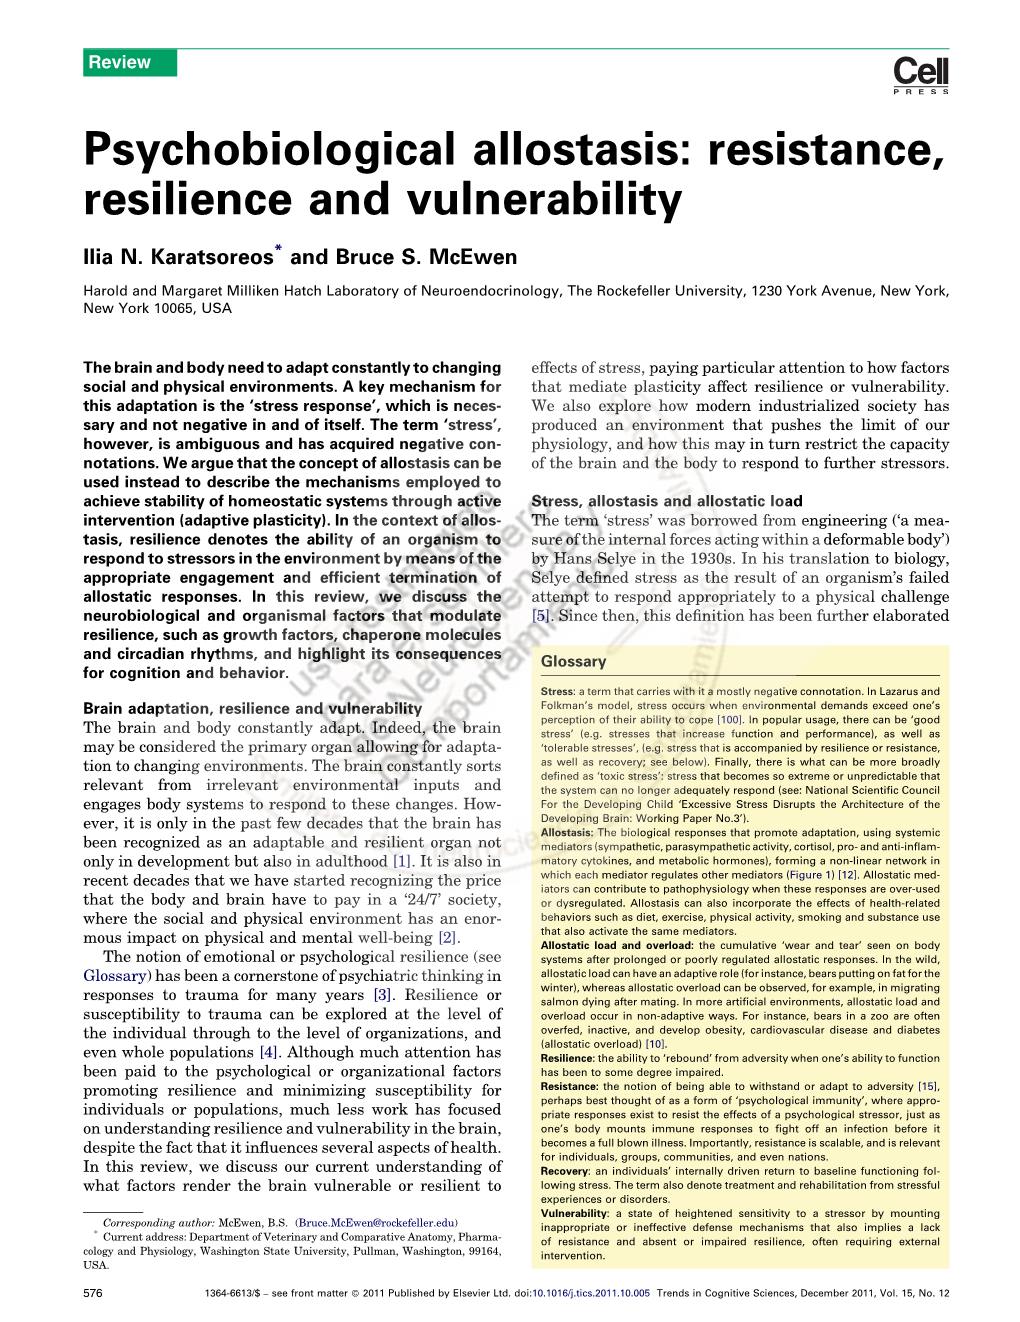 Psychobiological Allostasis: Resistance, Resilience and Vulnerability